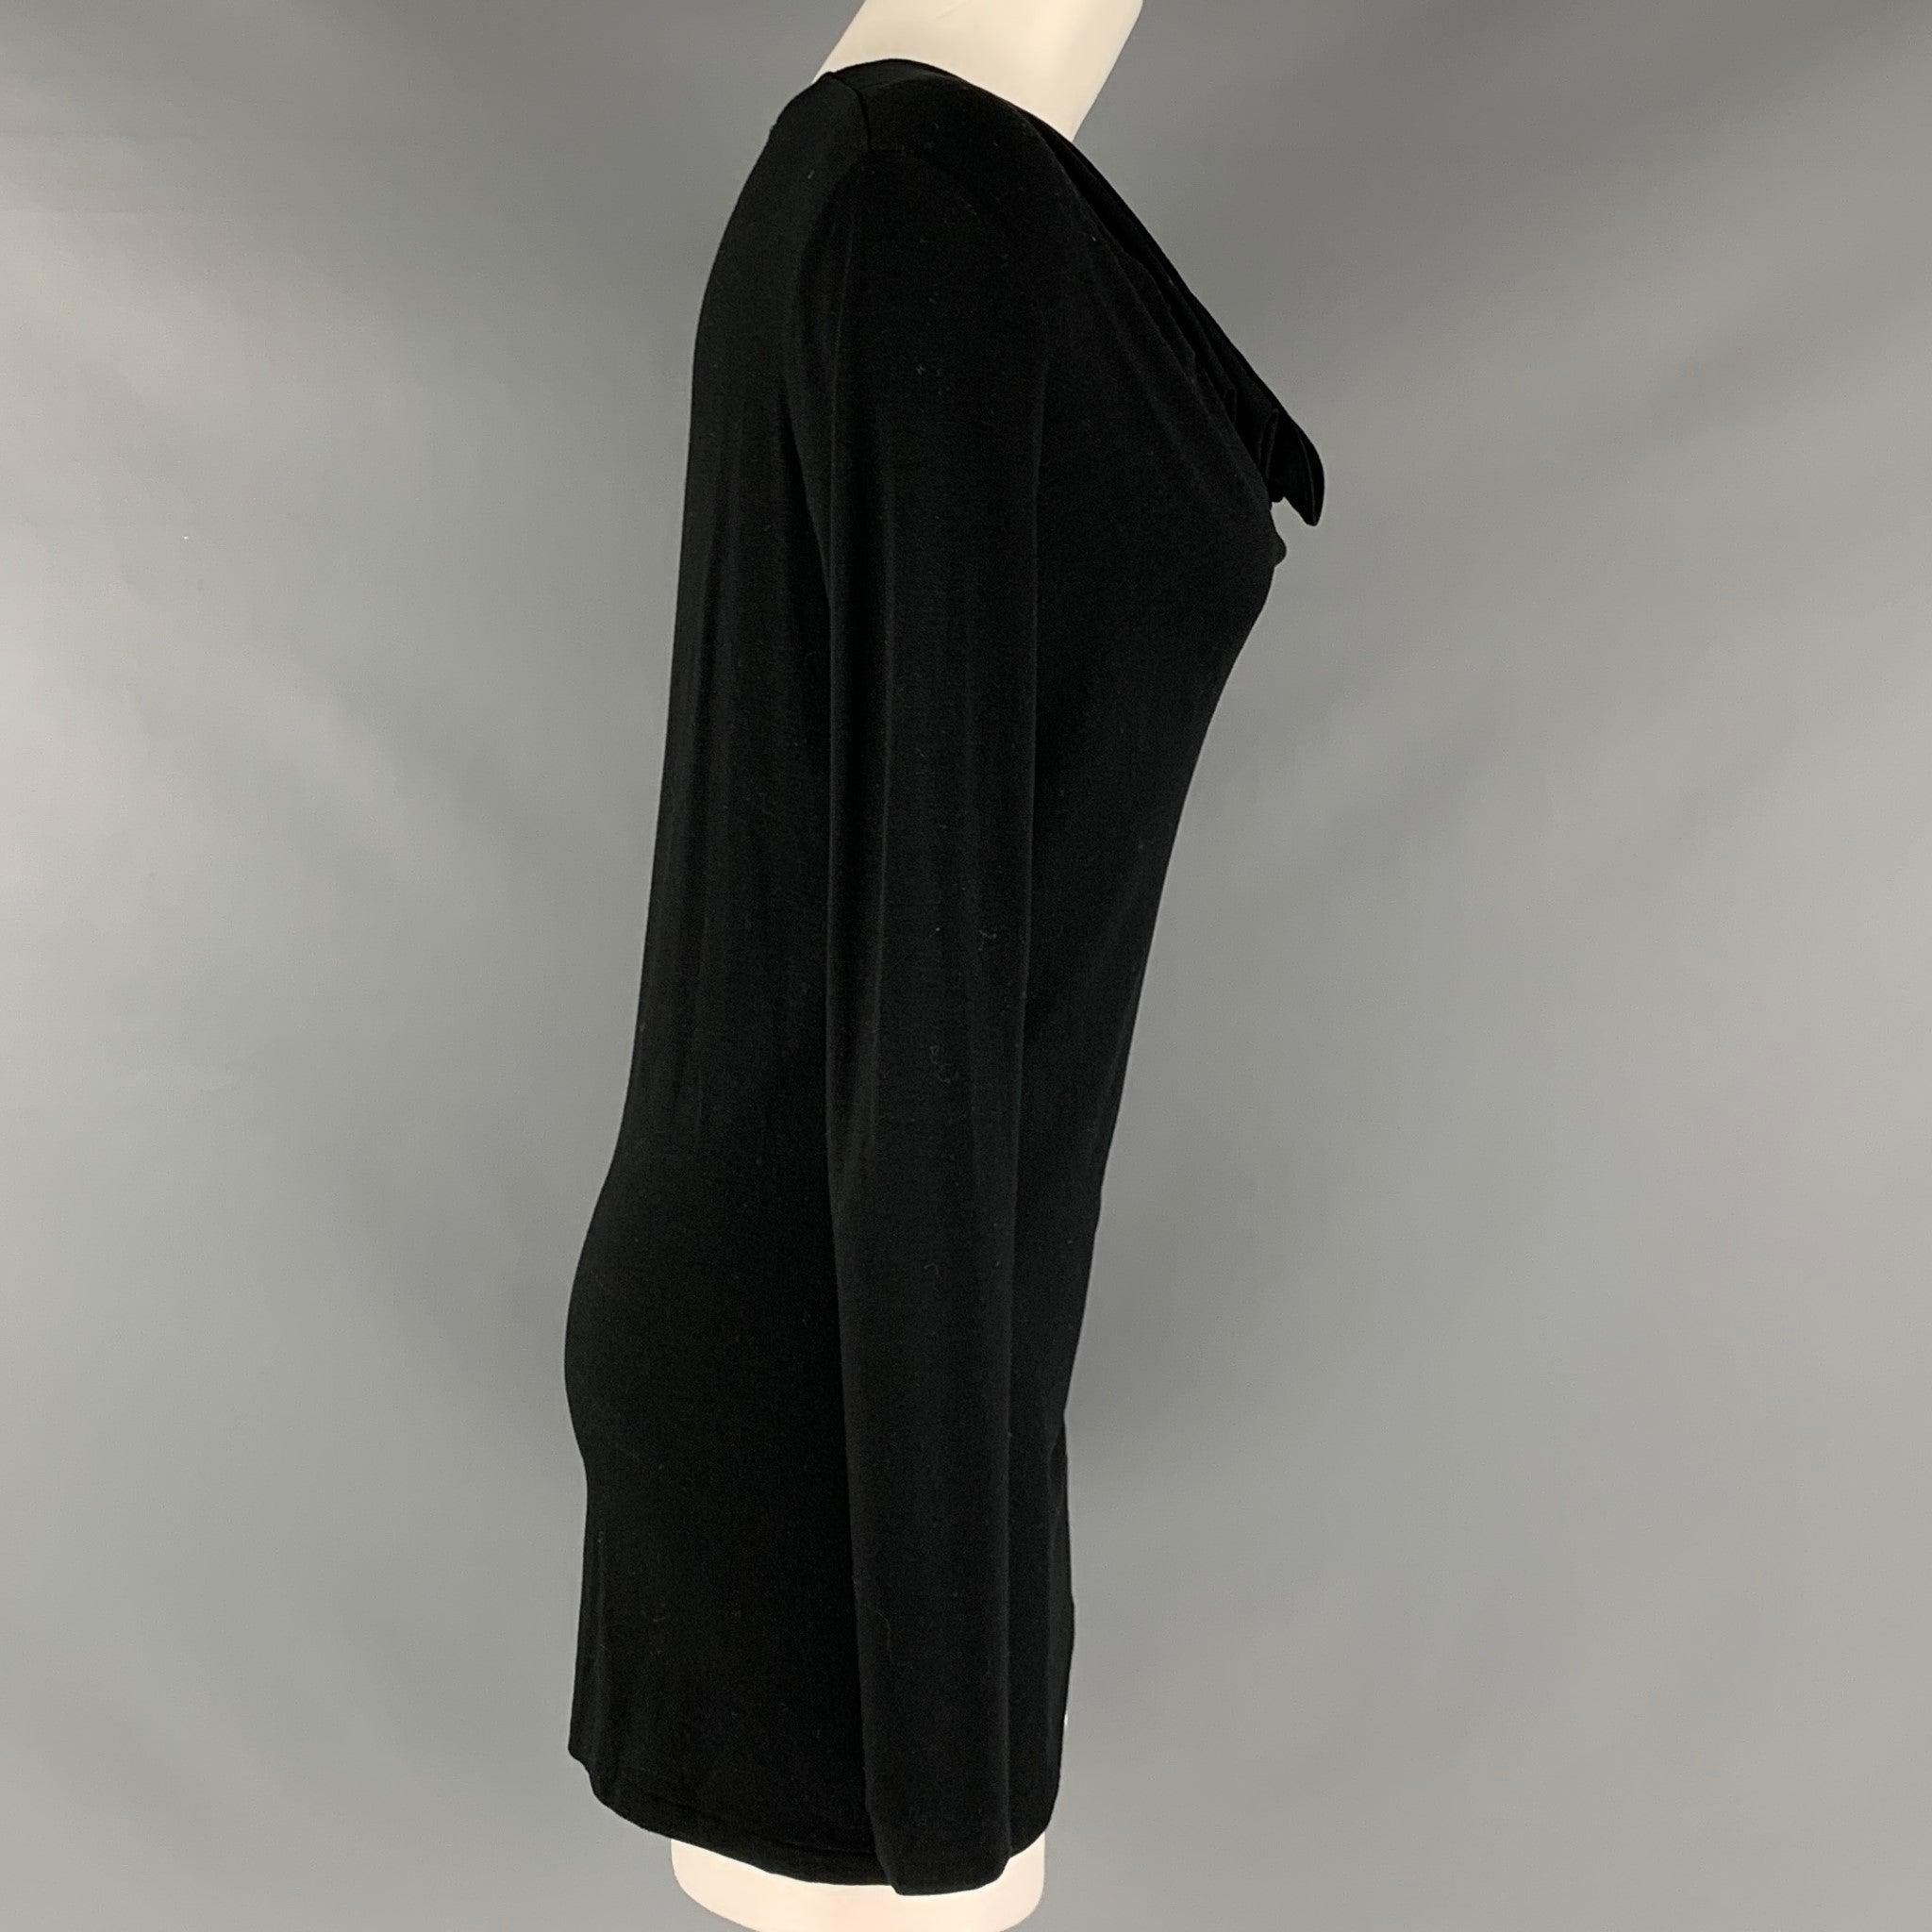 RALPH LAUREN Black Label pullover comes in a black viscose and elastane knit material featuring a
draped neckline, and long sleeve.Very Good Pre-Owned Condition. Moderate signs of wear. 

Marked:   S 

Measurements: 
 
Shoulder: 18 inches Bust: 39